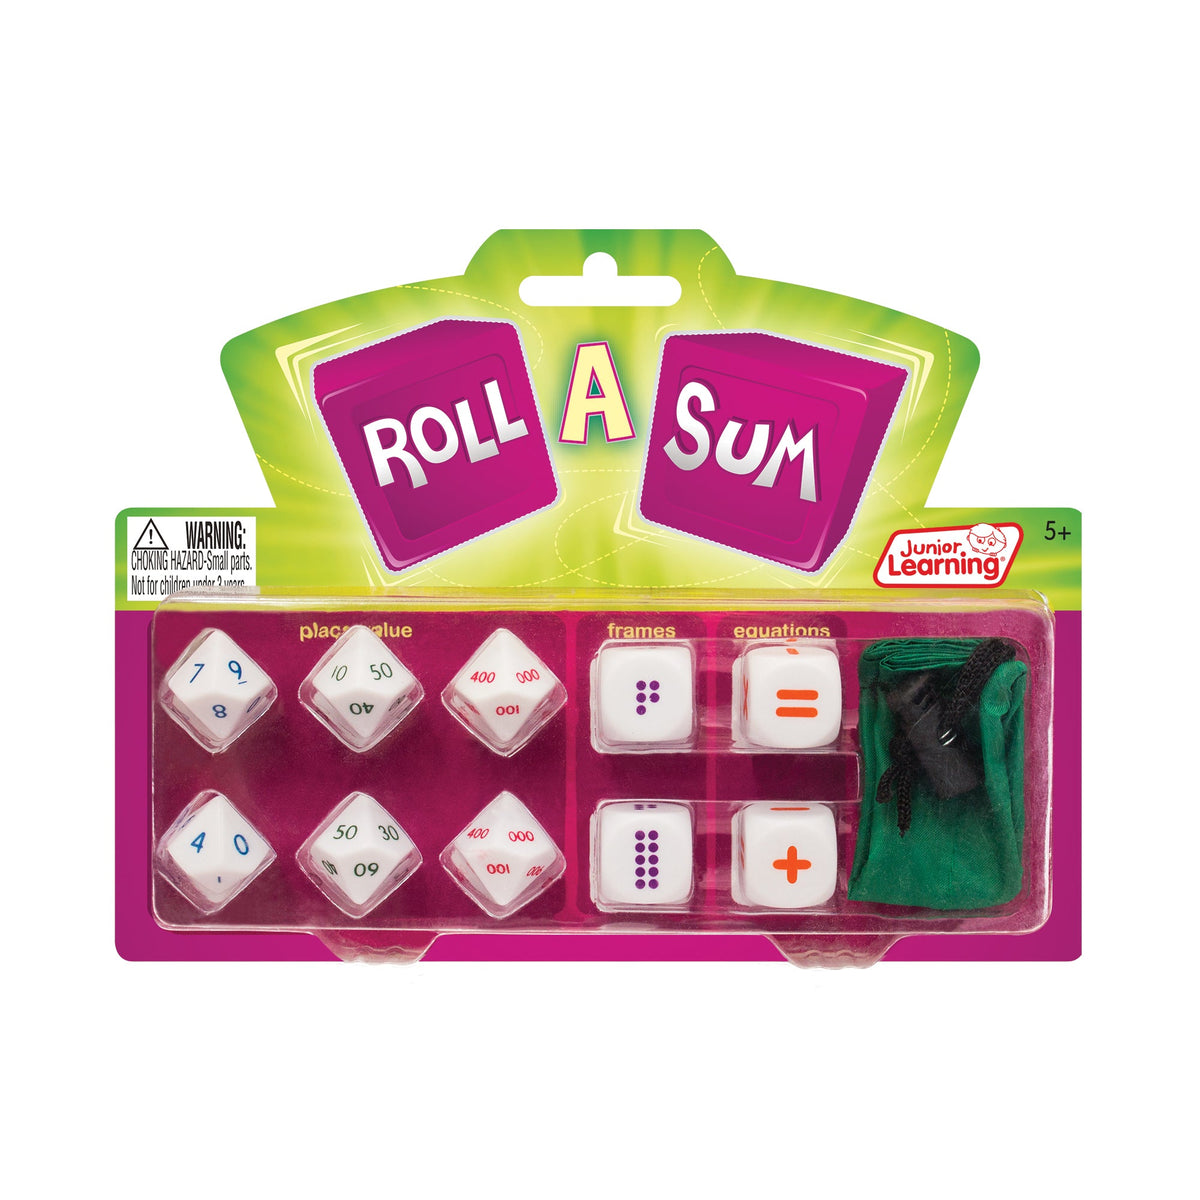 Junior Learning JL146 Roll A Sum packaging